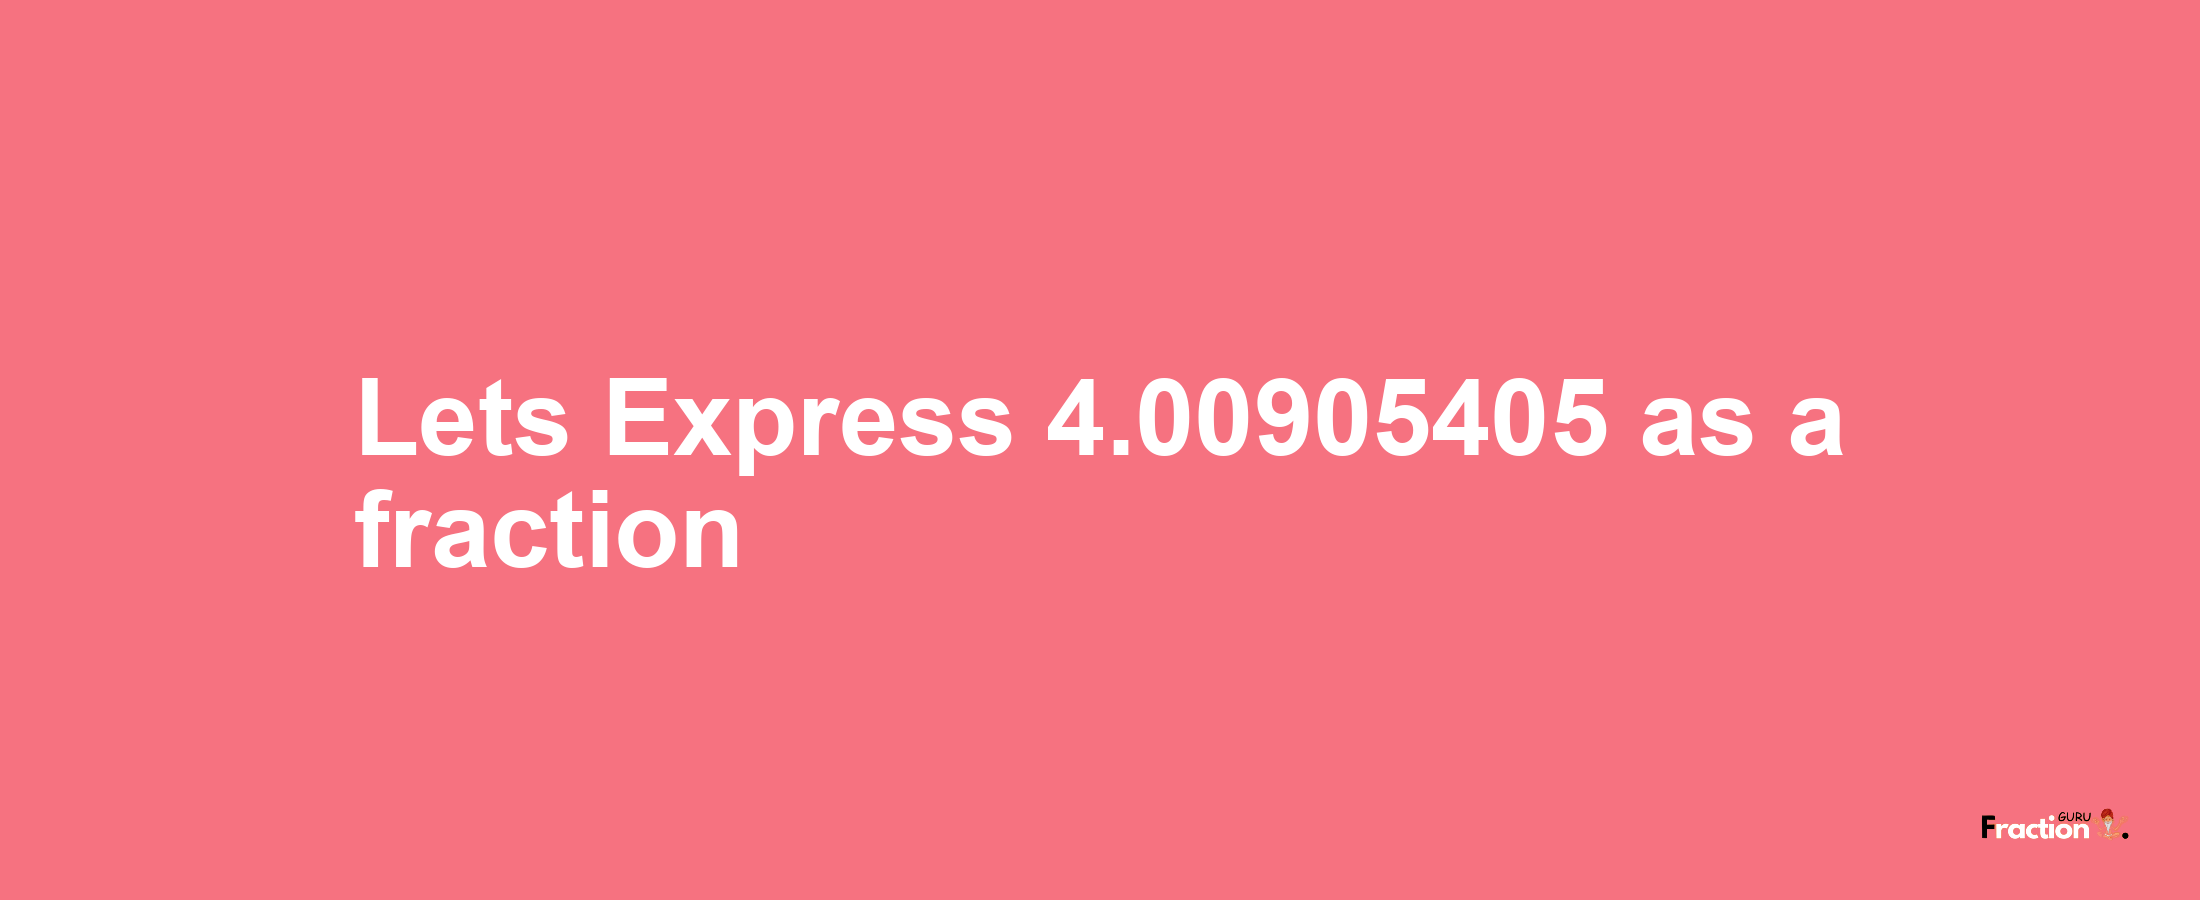 Lets Express 4.00905405 as afraction